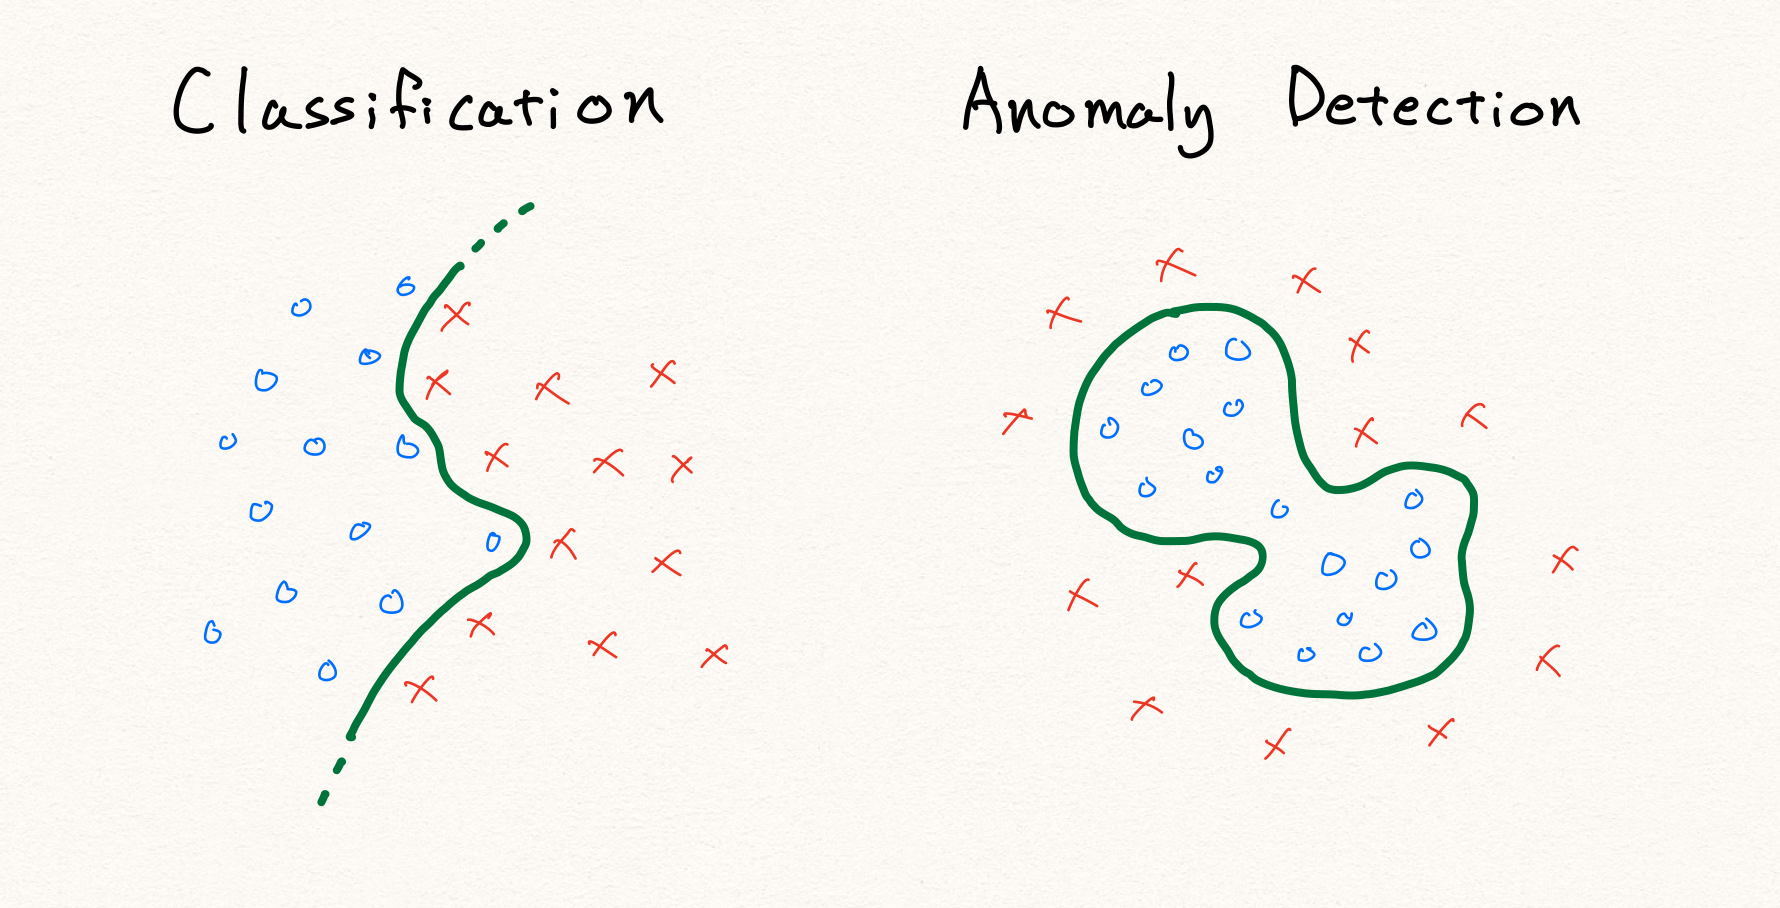 Introduction to Deep Anomaly Detection